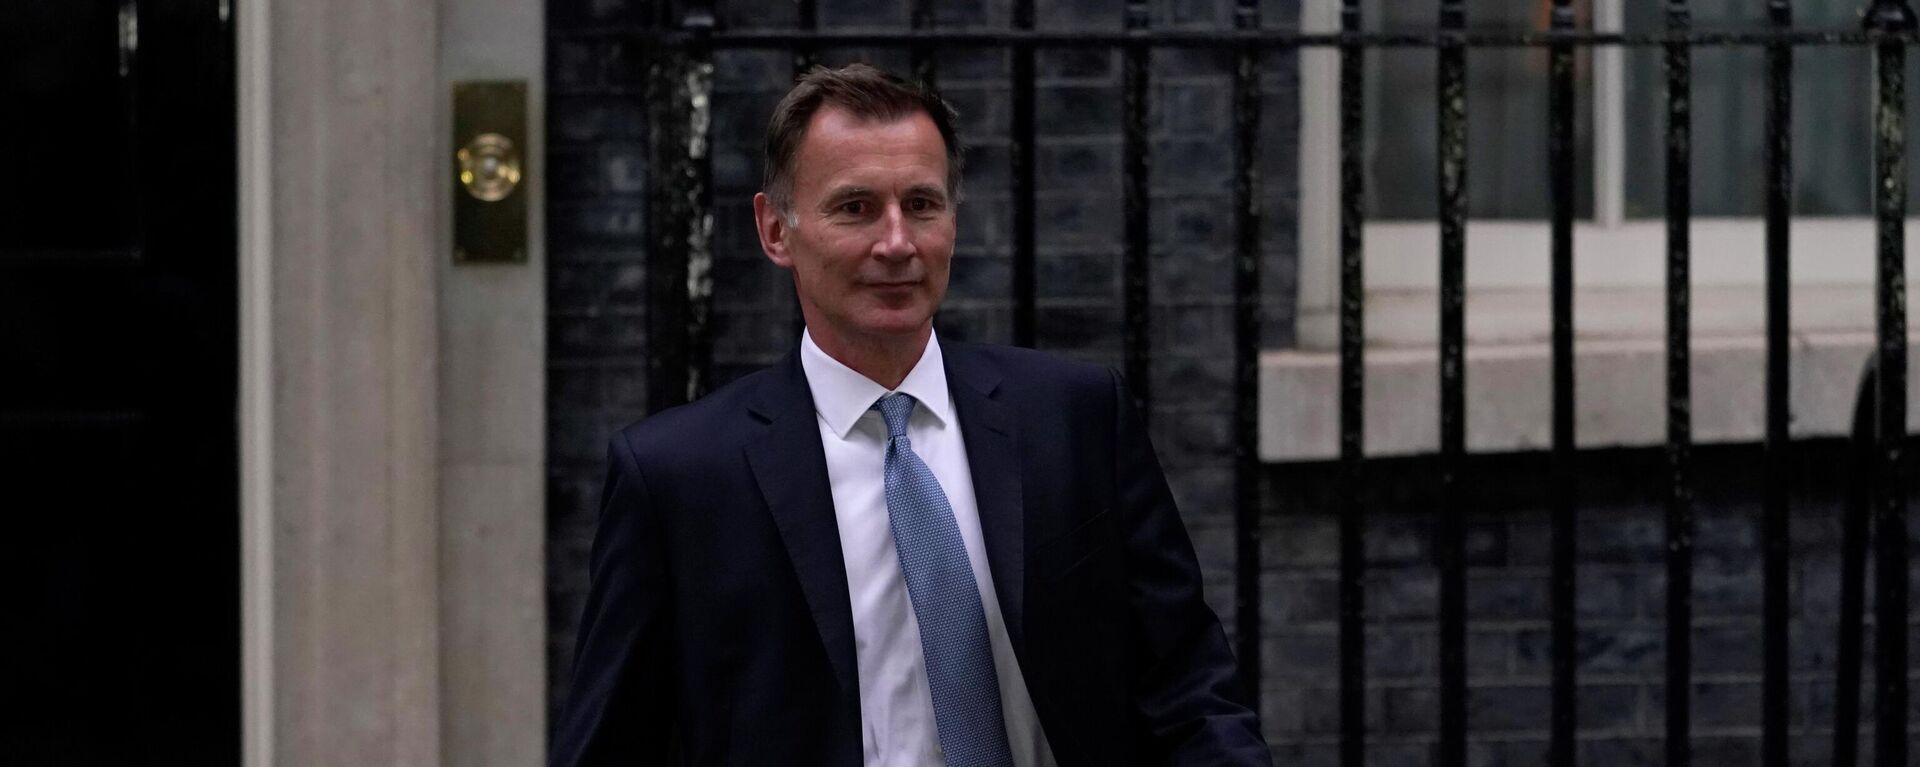 British Chancellor of the Exchequer Jeremy Hunt leaves 10 Downing Street after being appointed by Prime Minister Liz Truss - Sputnik International, 1920, 13.11.2022